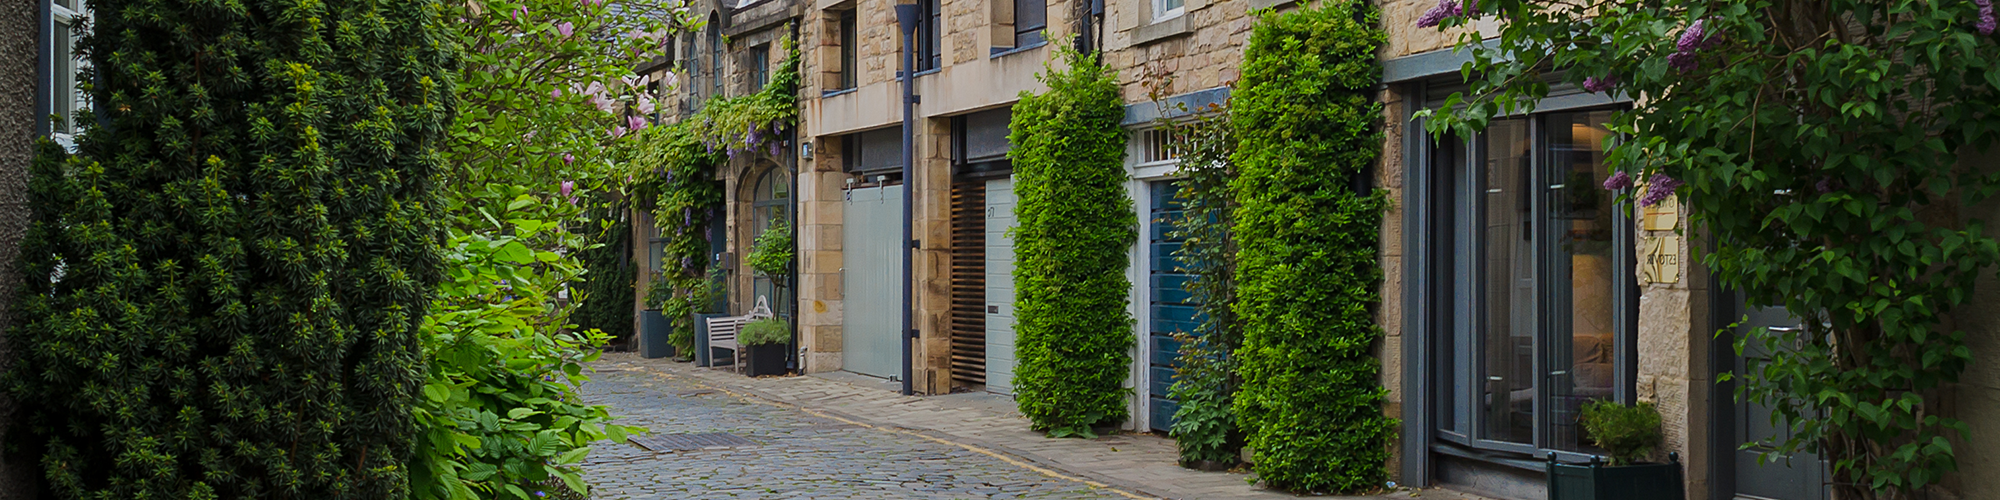 A leafy cobbled residential street, of converted garages. SAM Conveyancing discussed the risks of buying a house with a garage conversion without building regulations, and how to resolve them.